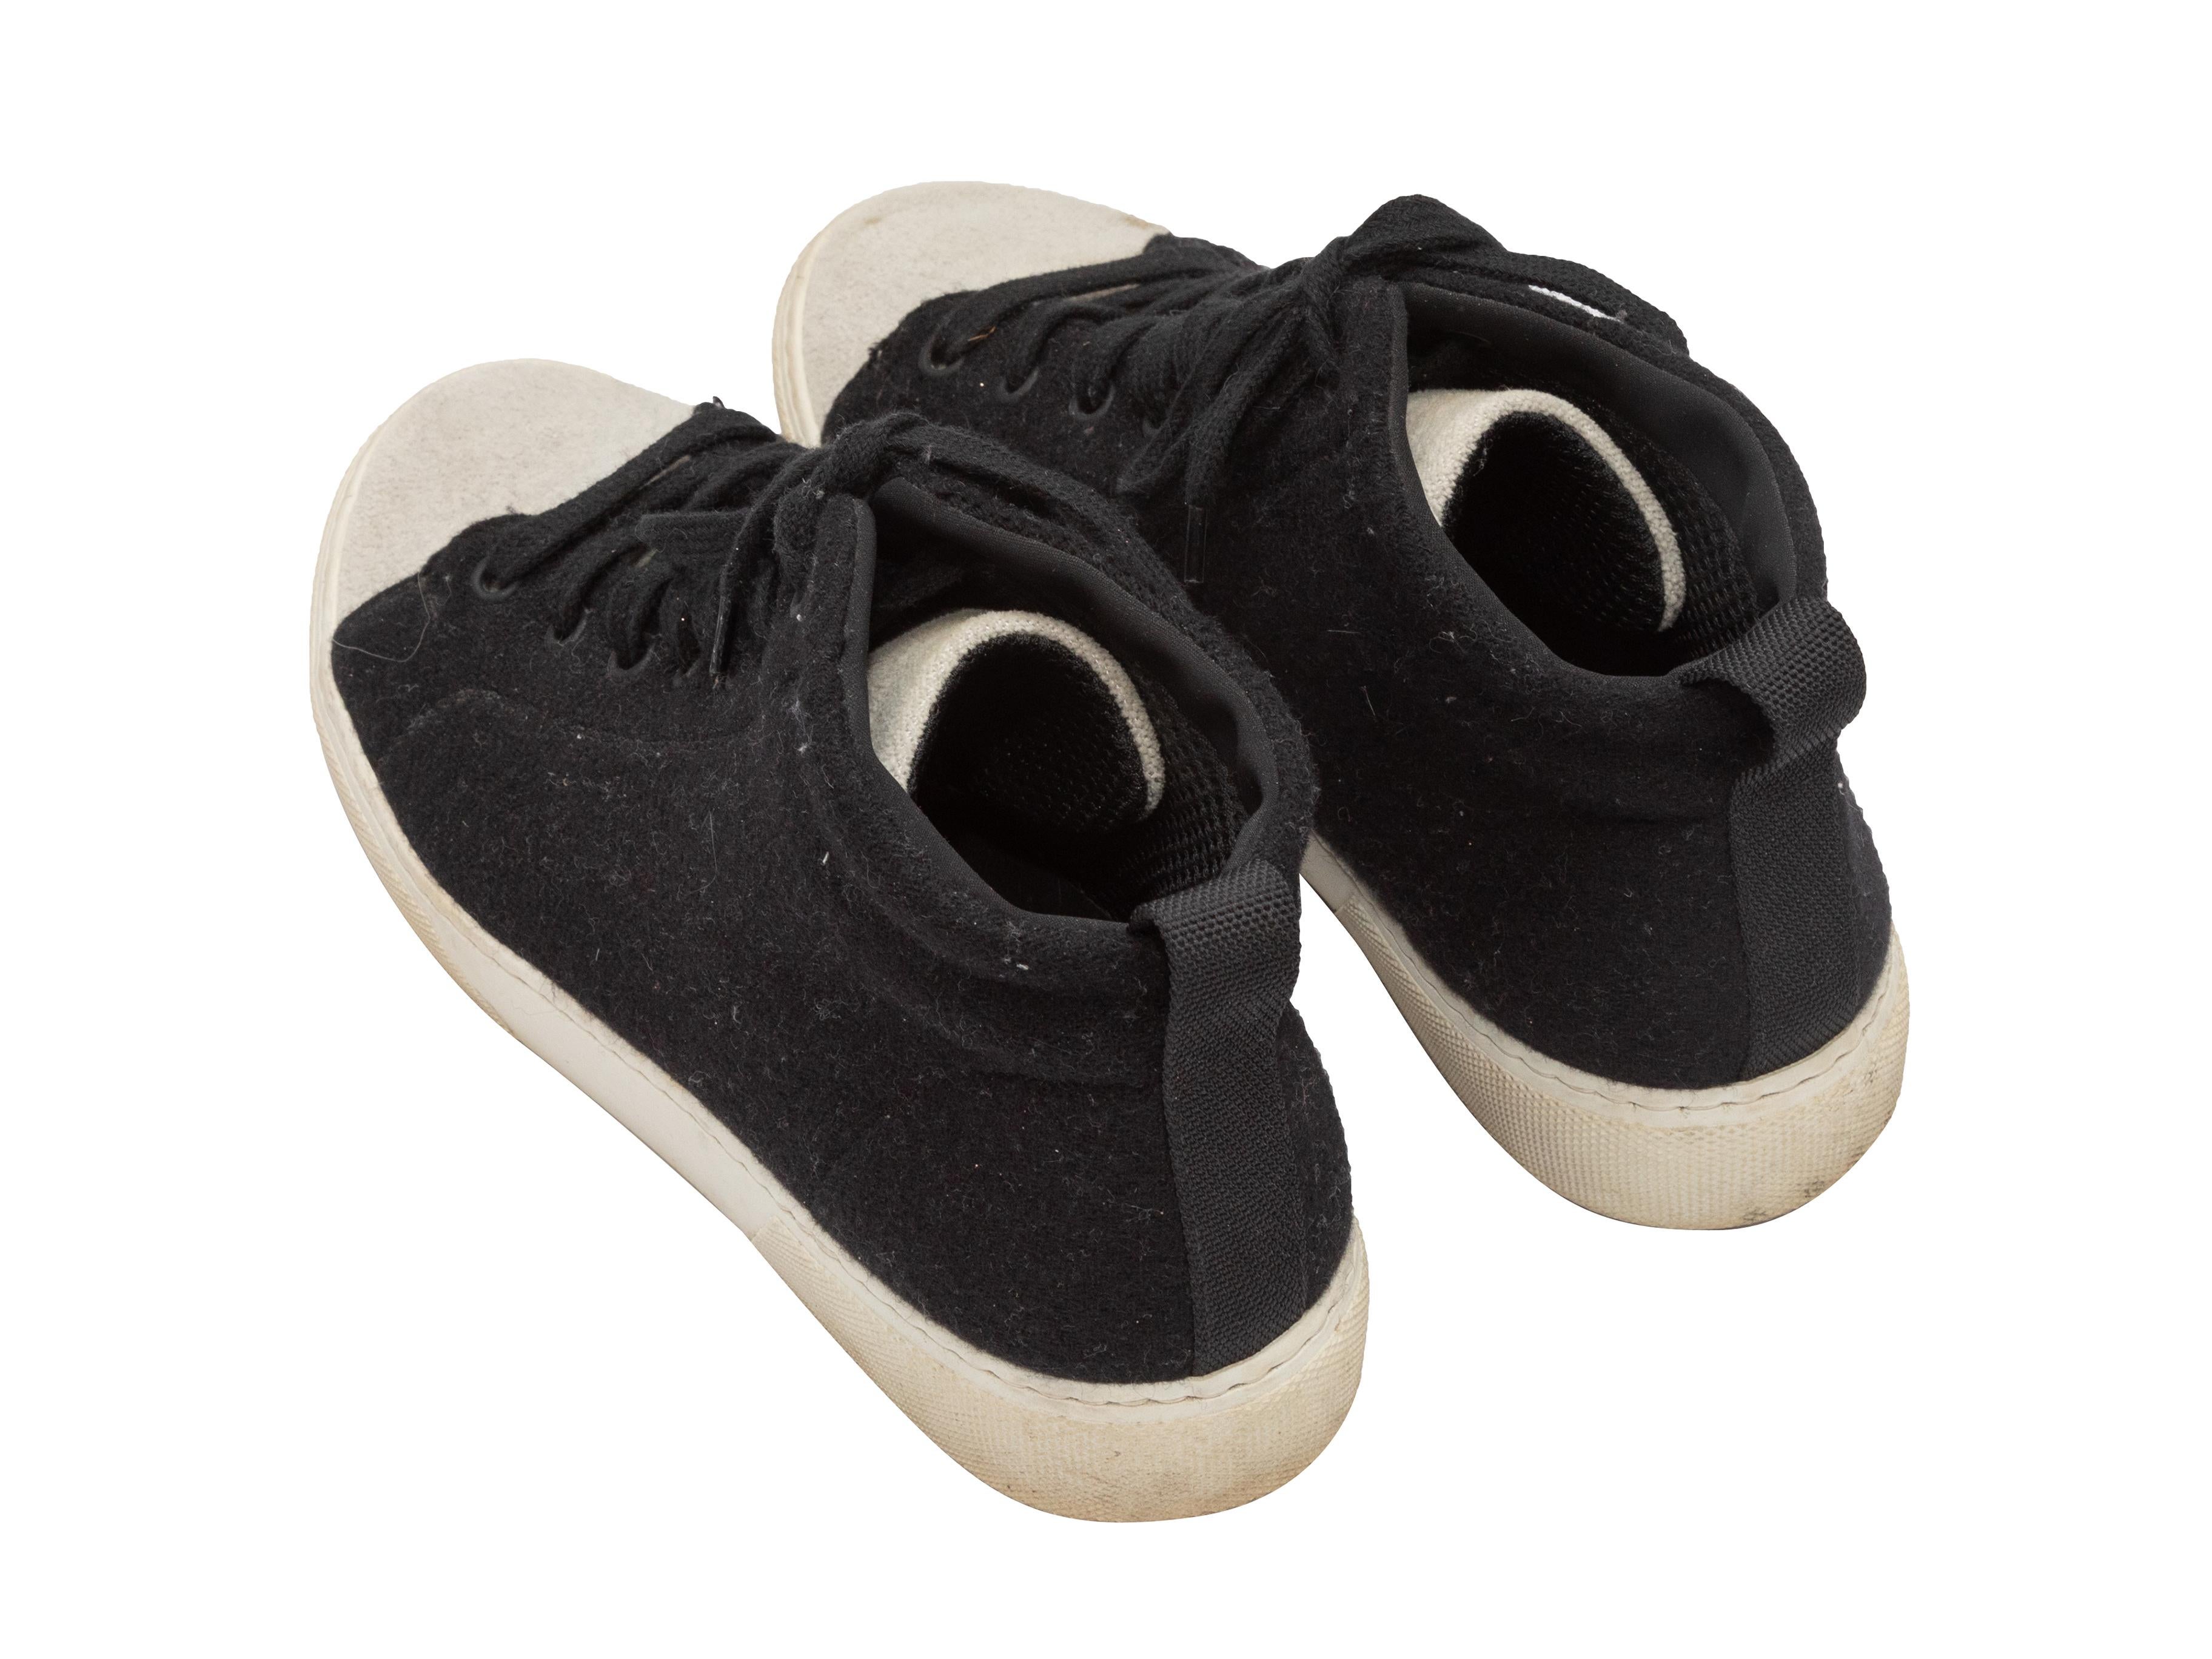 Black & White James Perse Wool High-Top Sneakers In Excellent Condition For Sale In New York, NY